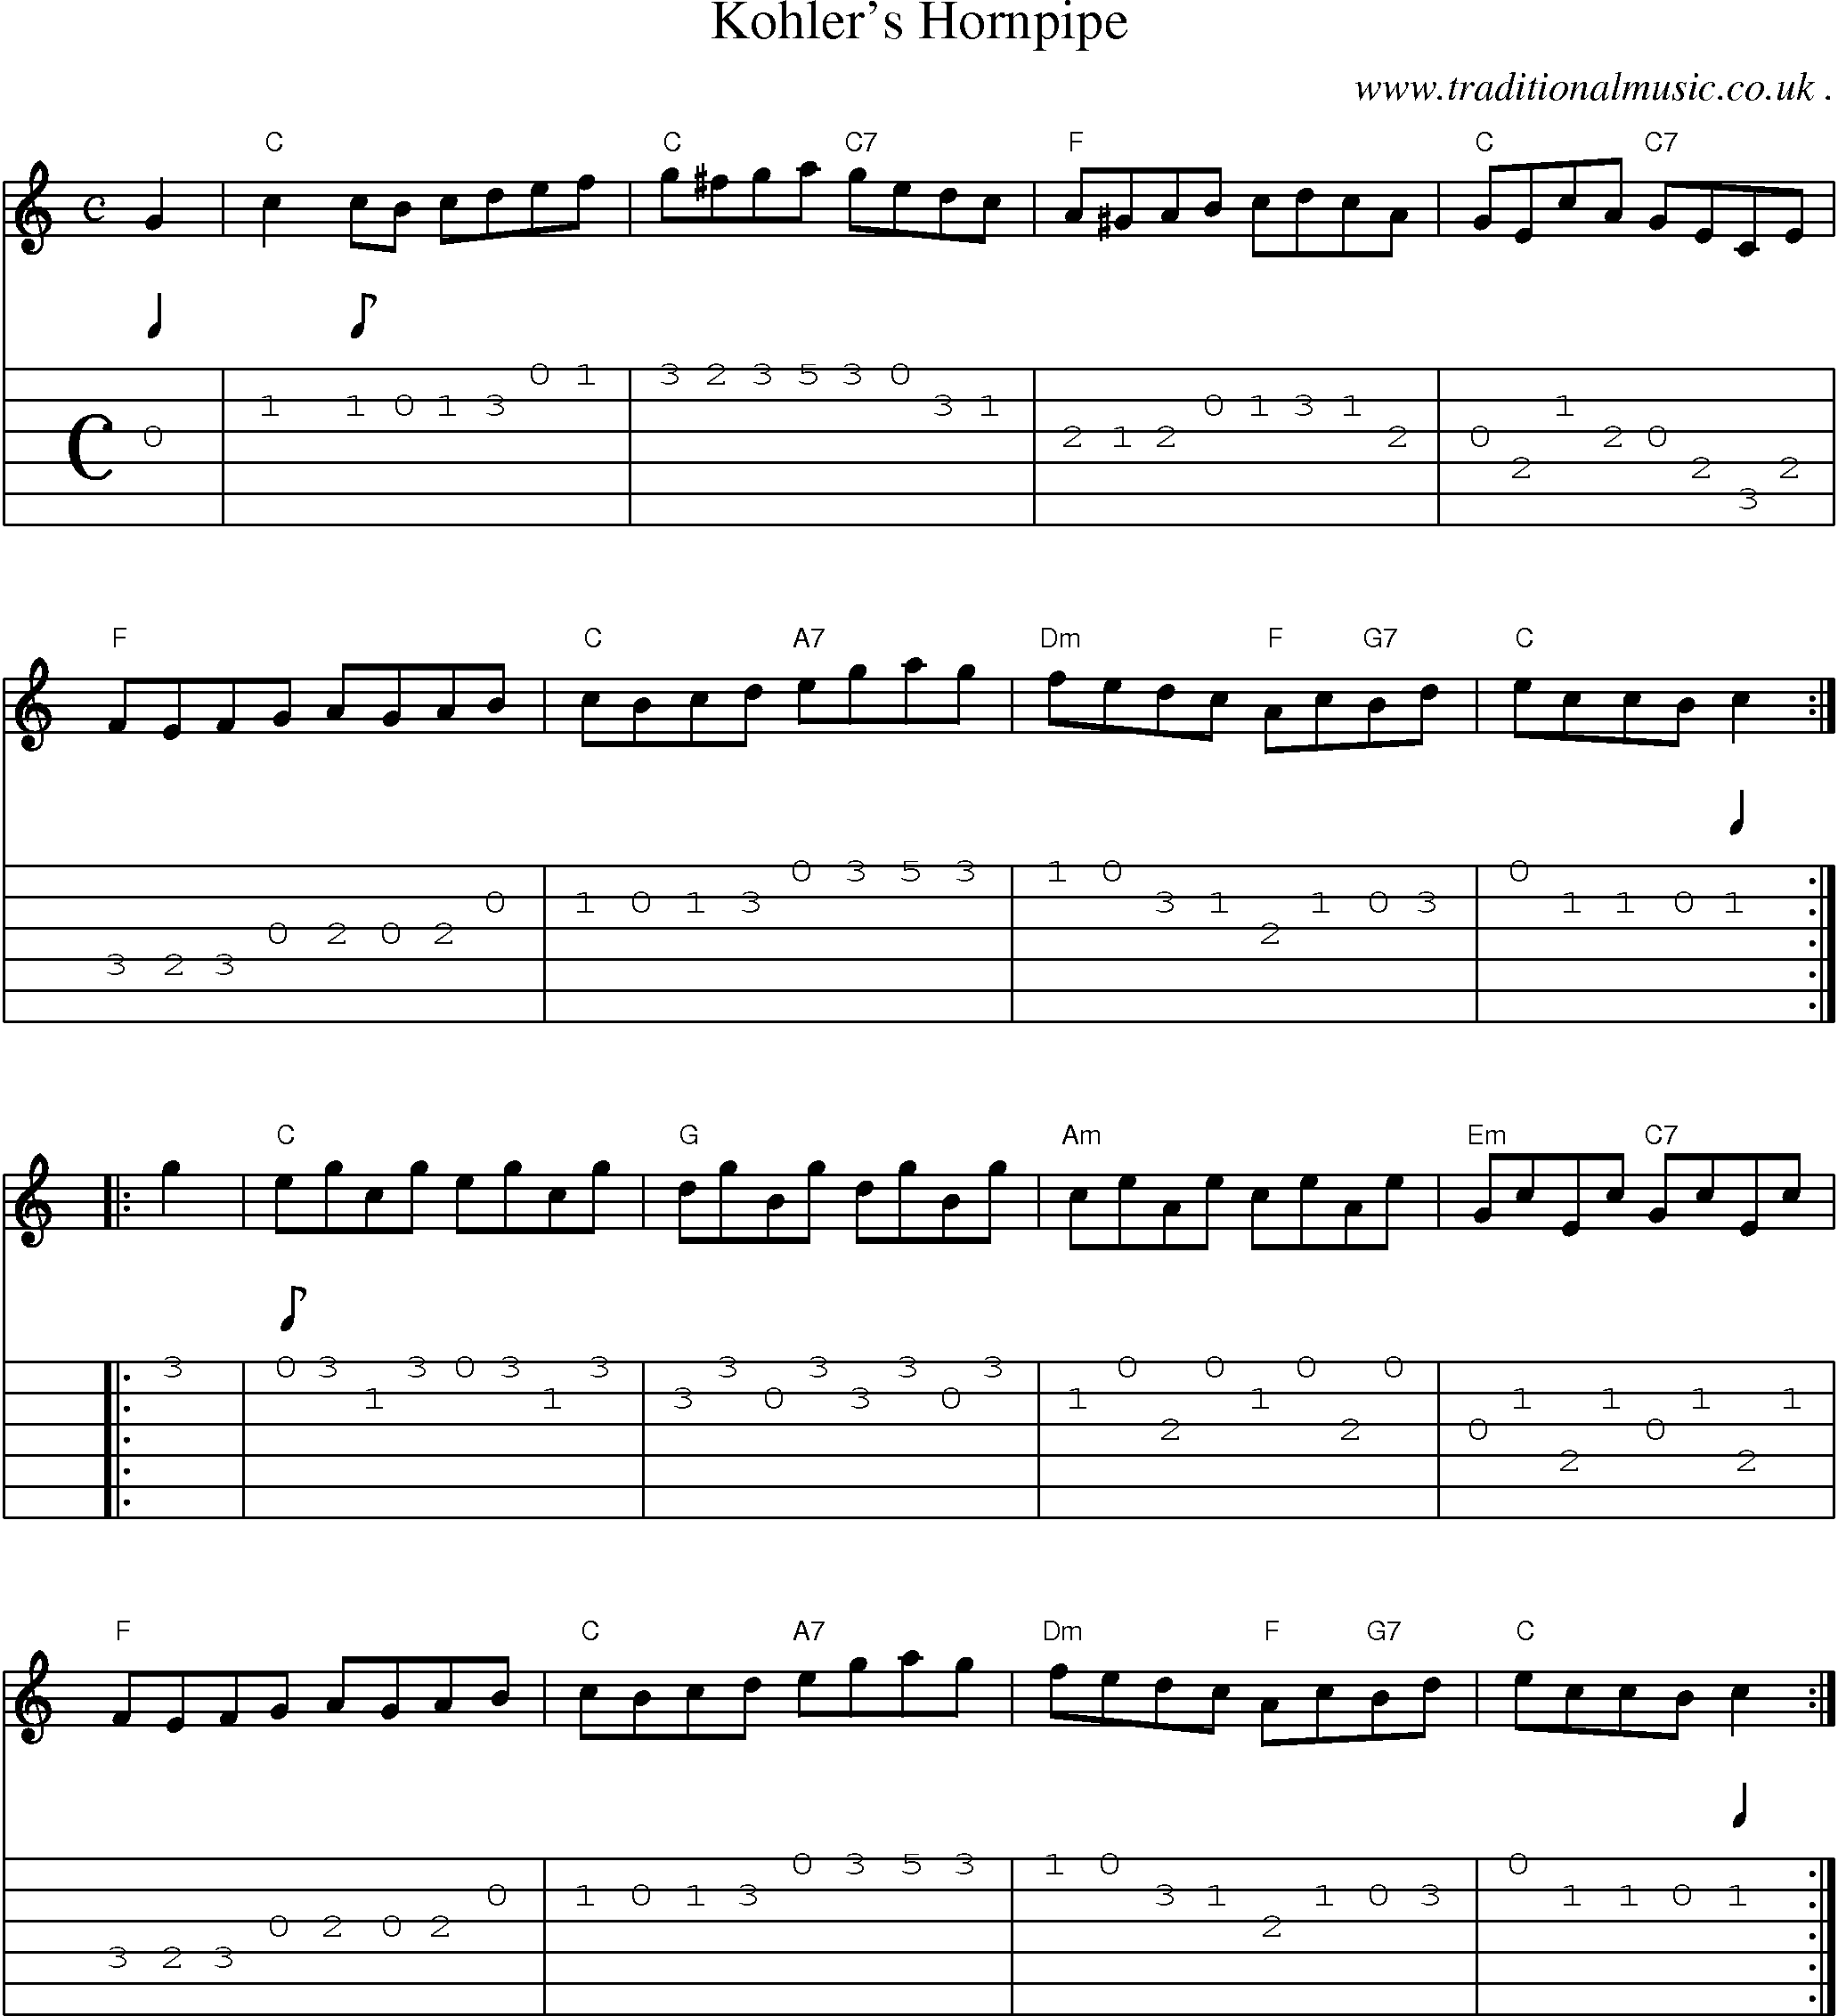 Music Score and Guitar Tabs for Kohlers Hornpipe